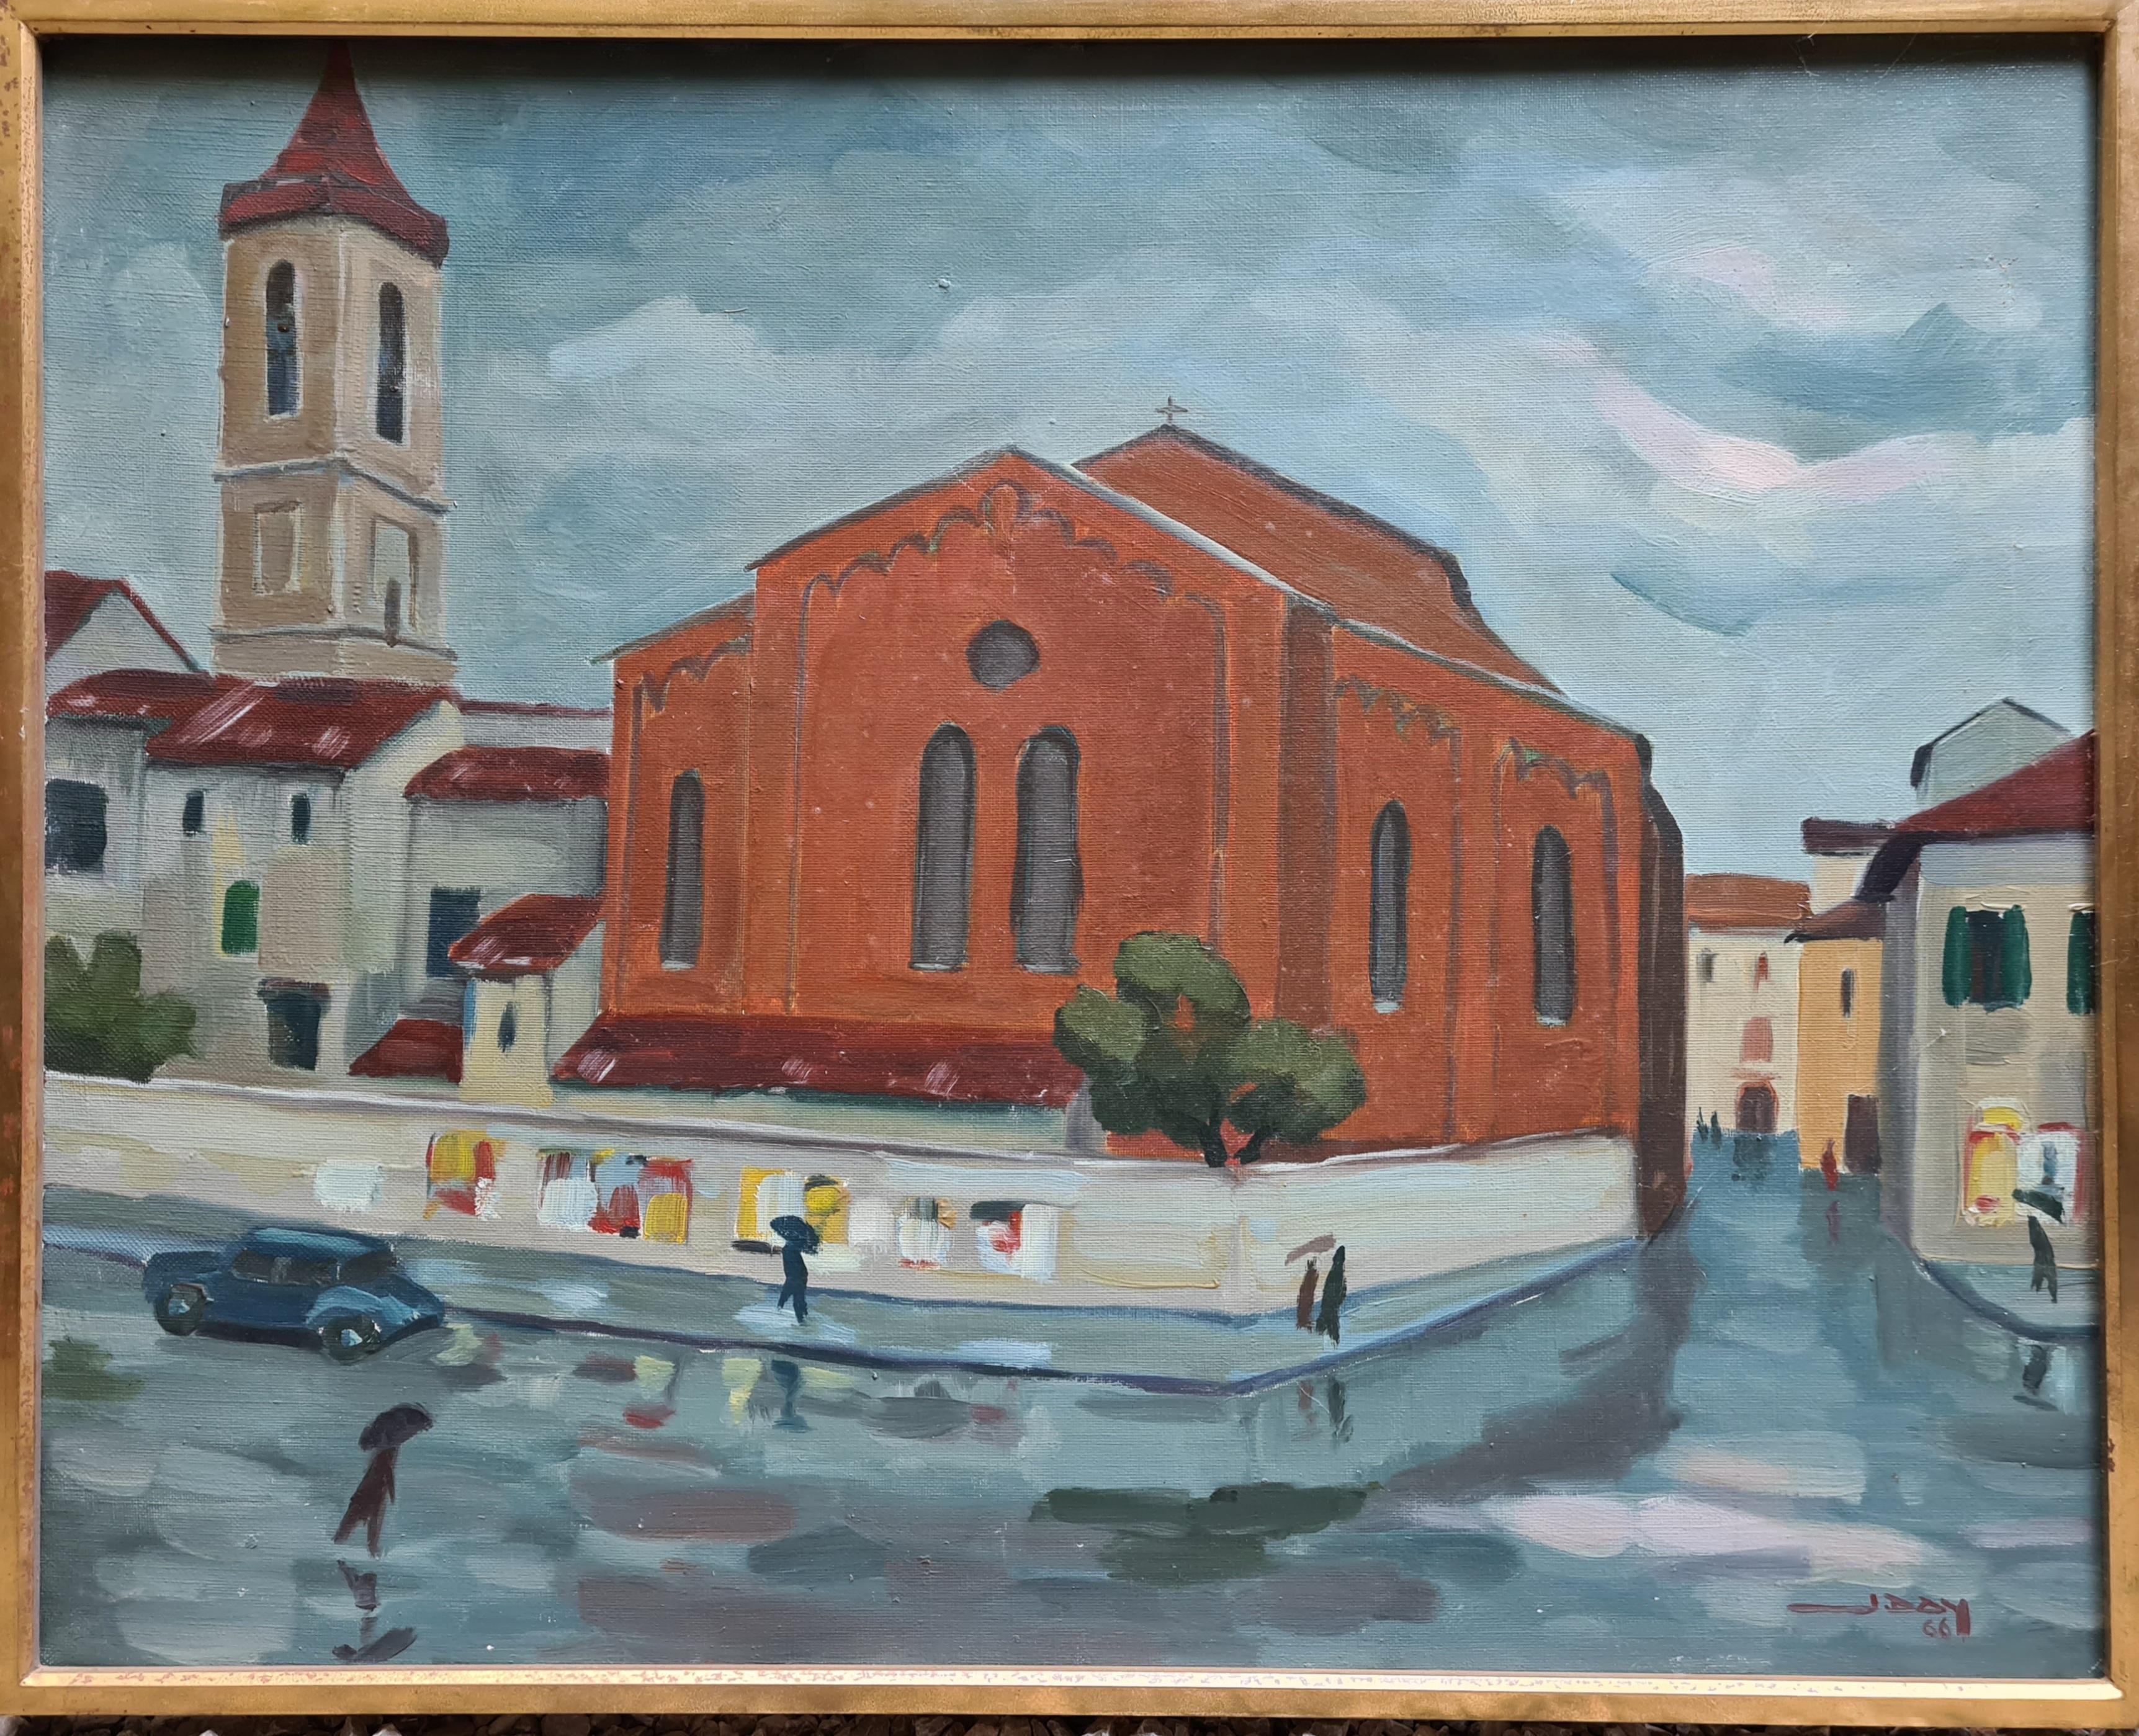 Jan Day Landscape Painting - Pluie a Prato, Street Scene in Tuscany, Italy